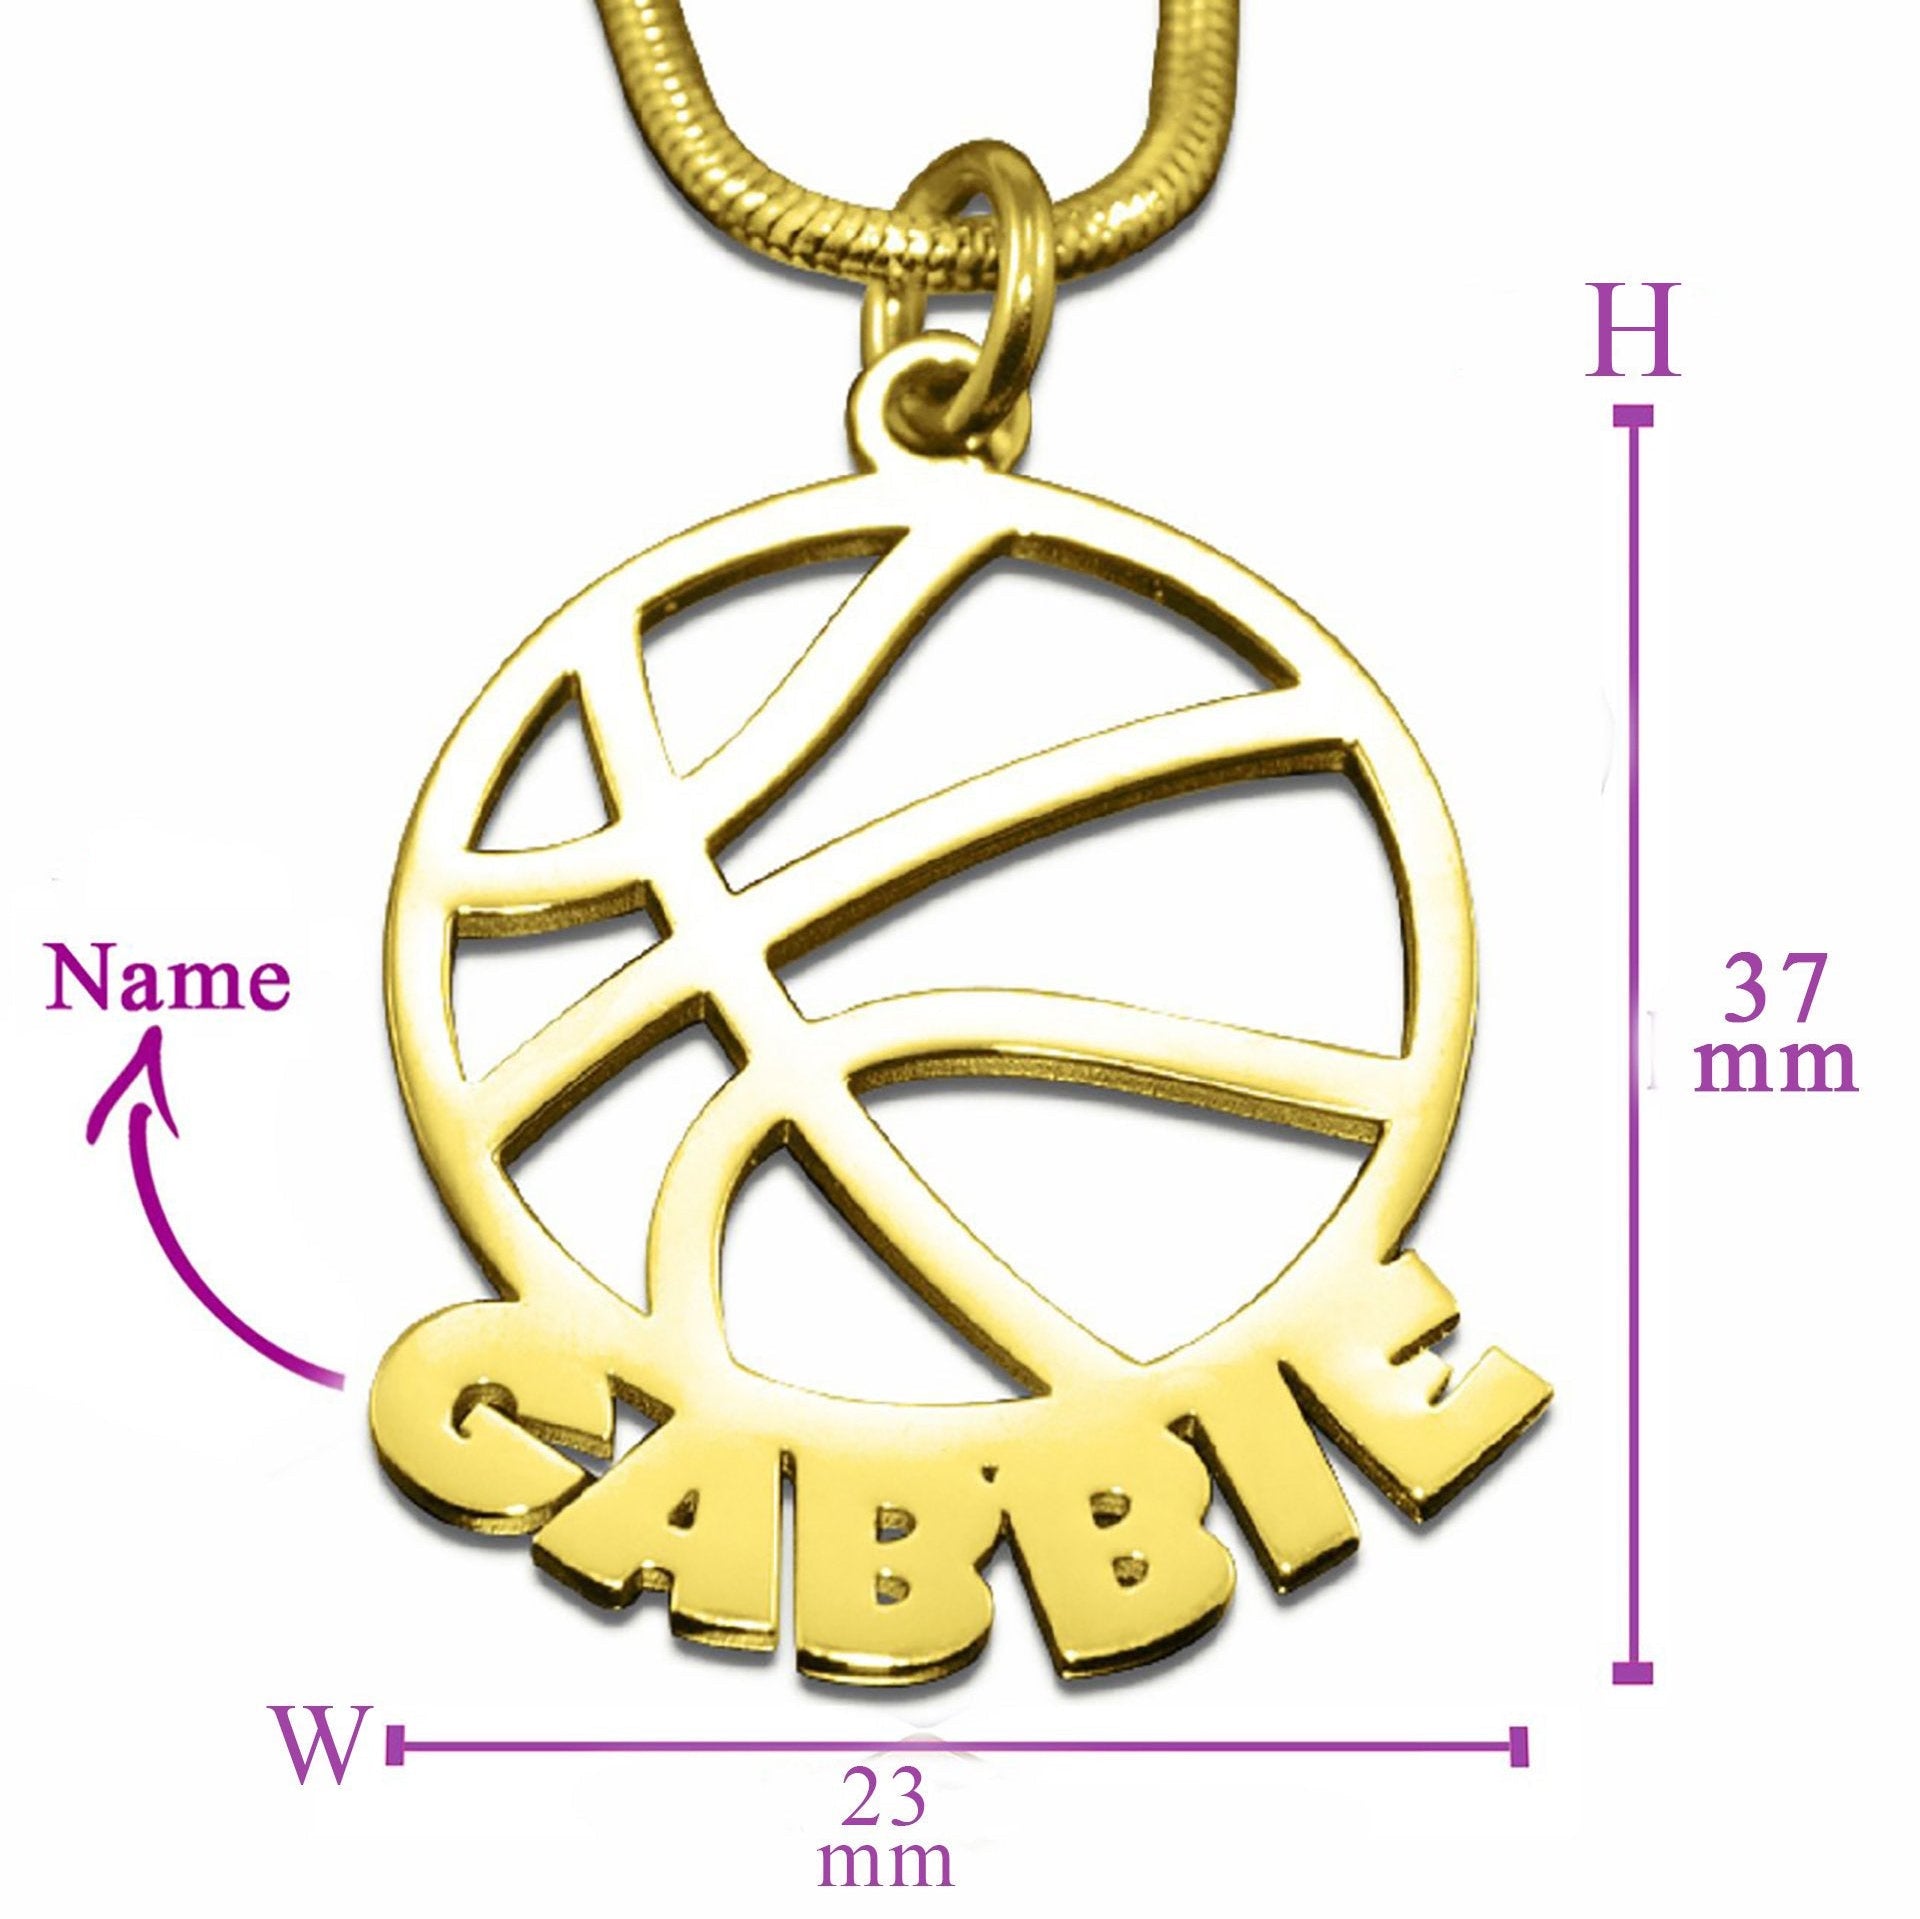 Basketball Name Necklace - Name Necklaces by Belle Fever